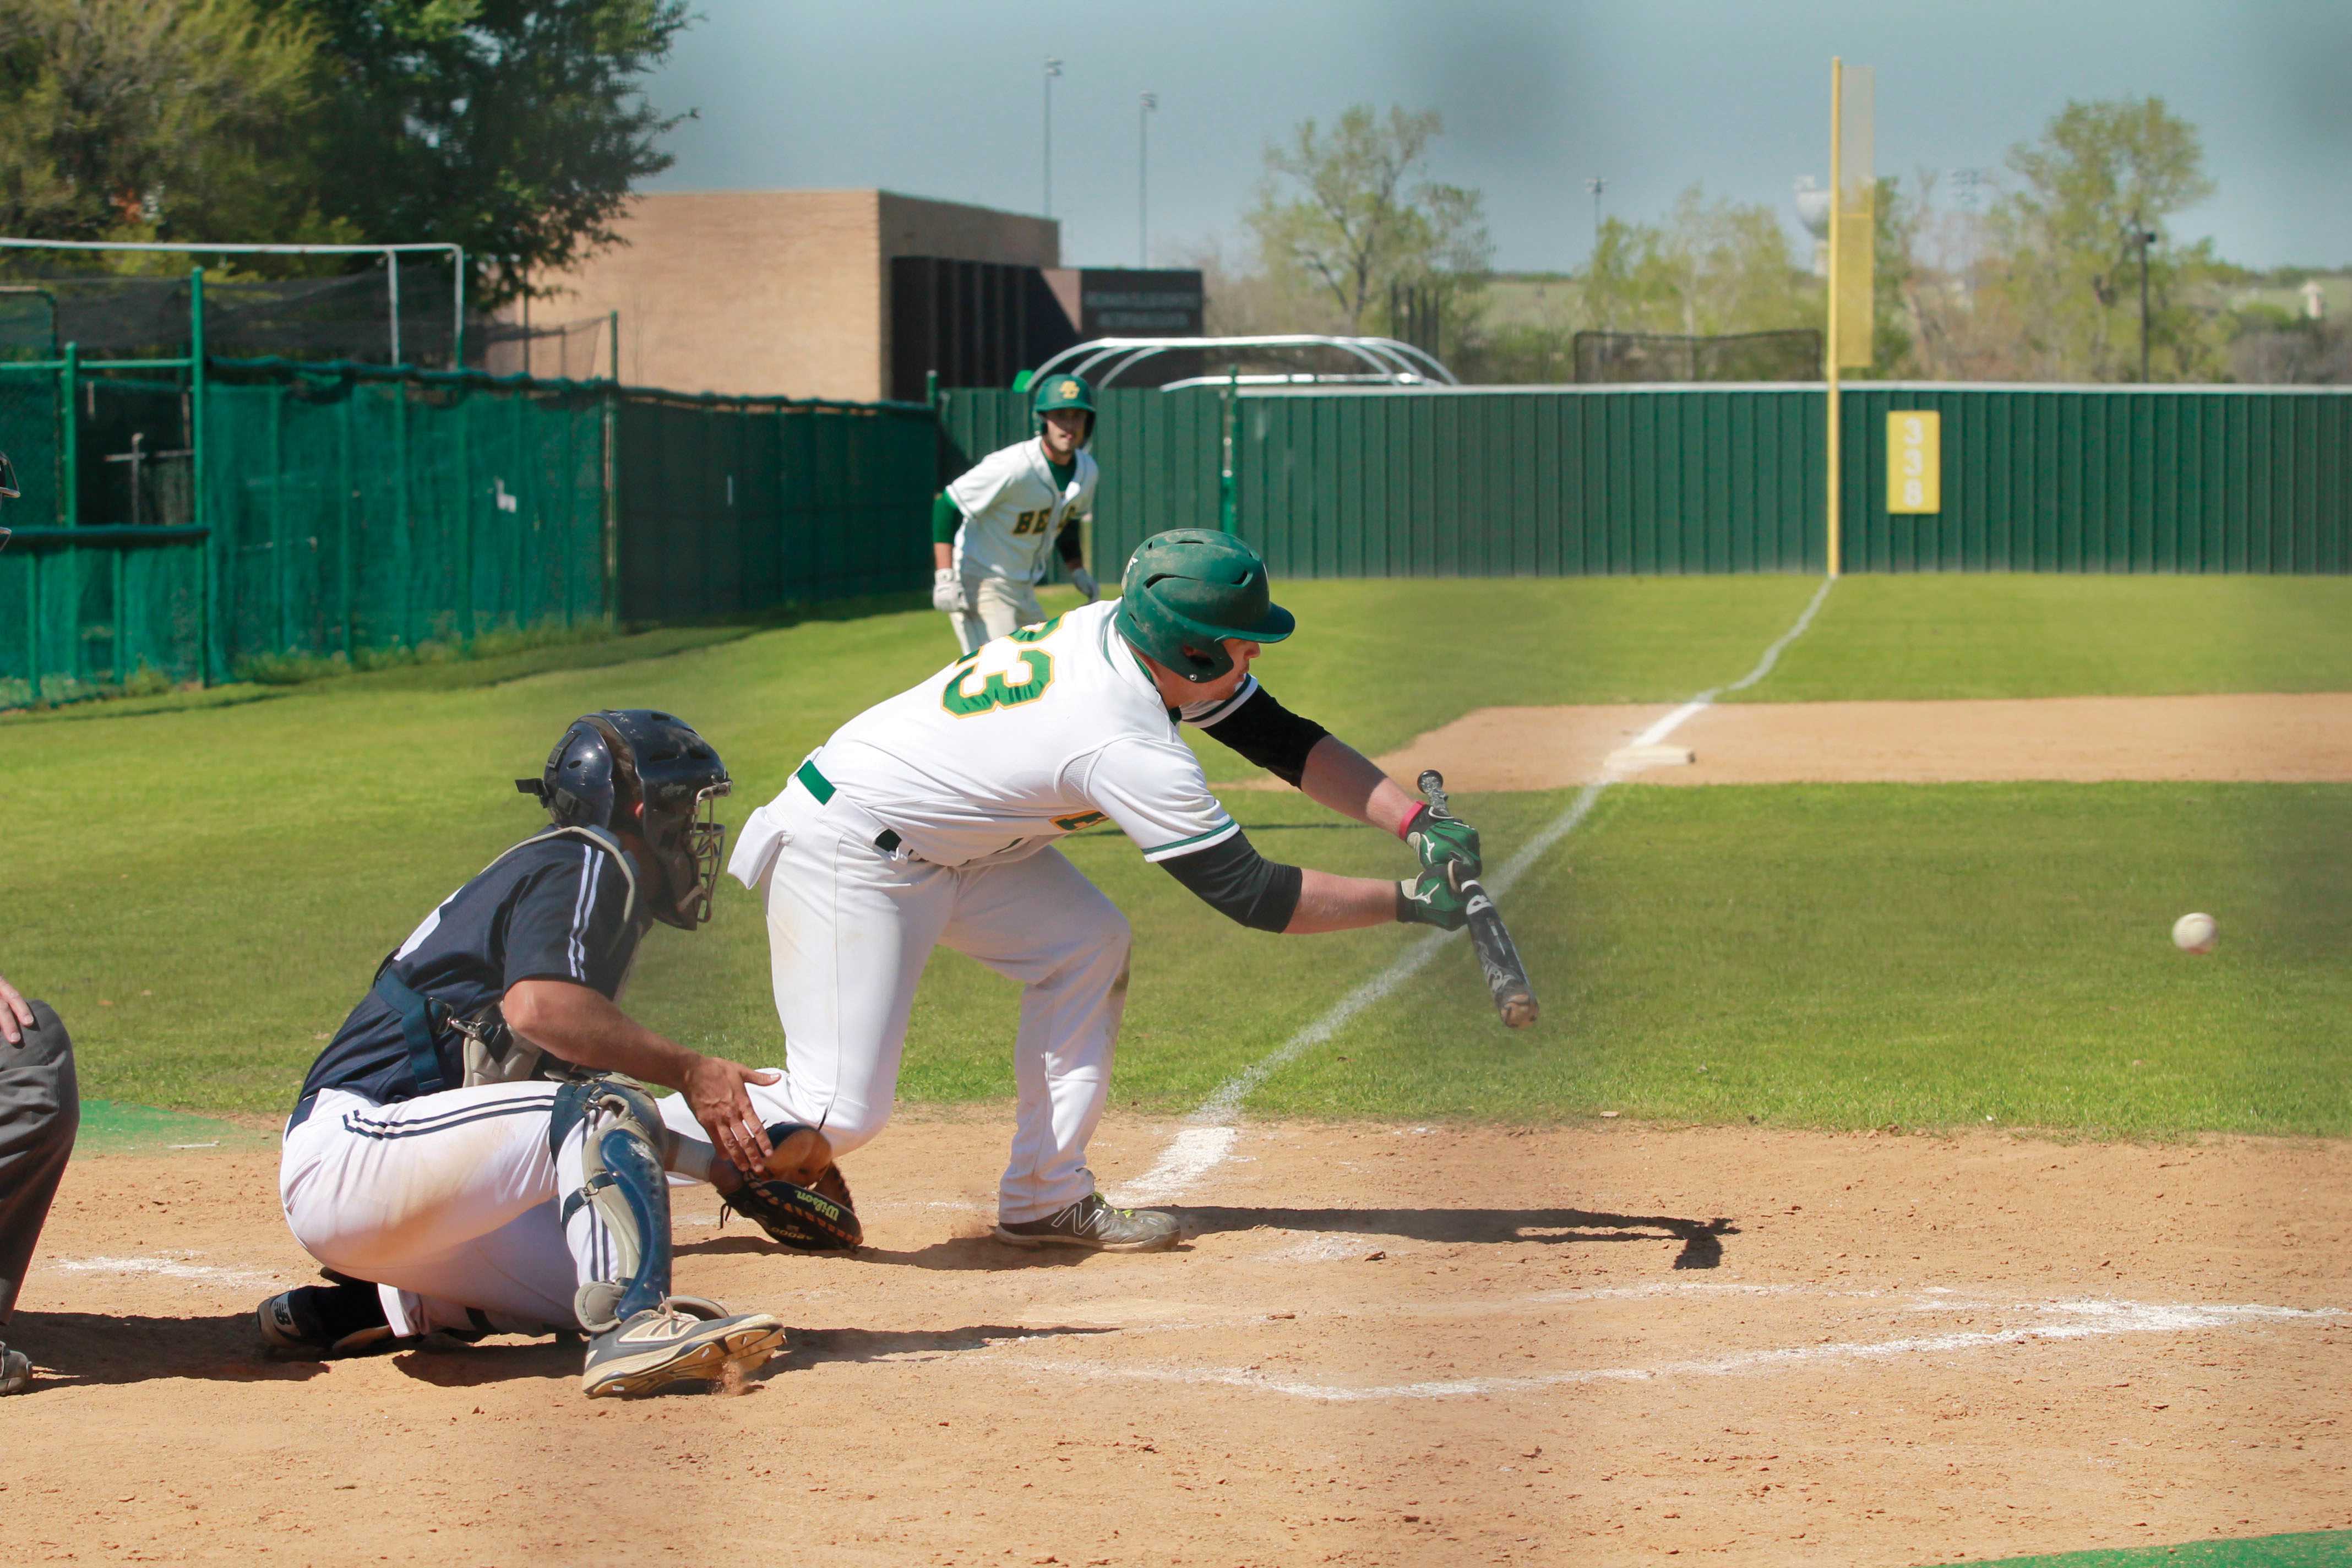 Bear Brian Canida (#23) prepares to lay down the game-winning bunt on a suicide squeeze play in the bottom of the eighth inning to plate Adam Diehl (#14) from third base to win 6-5